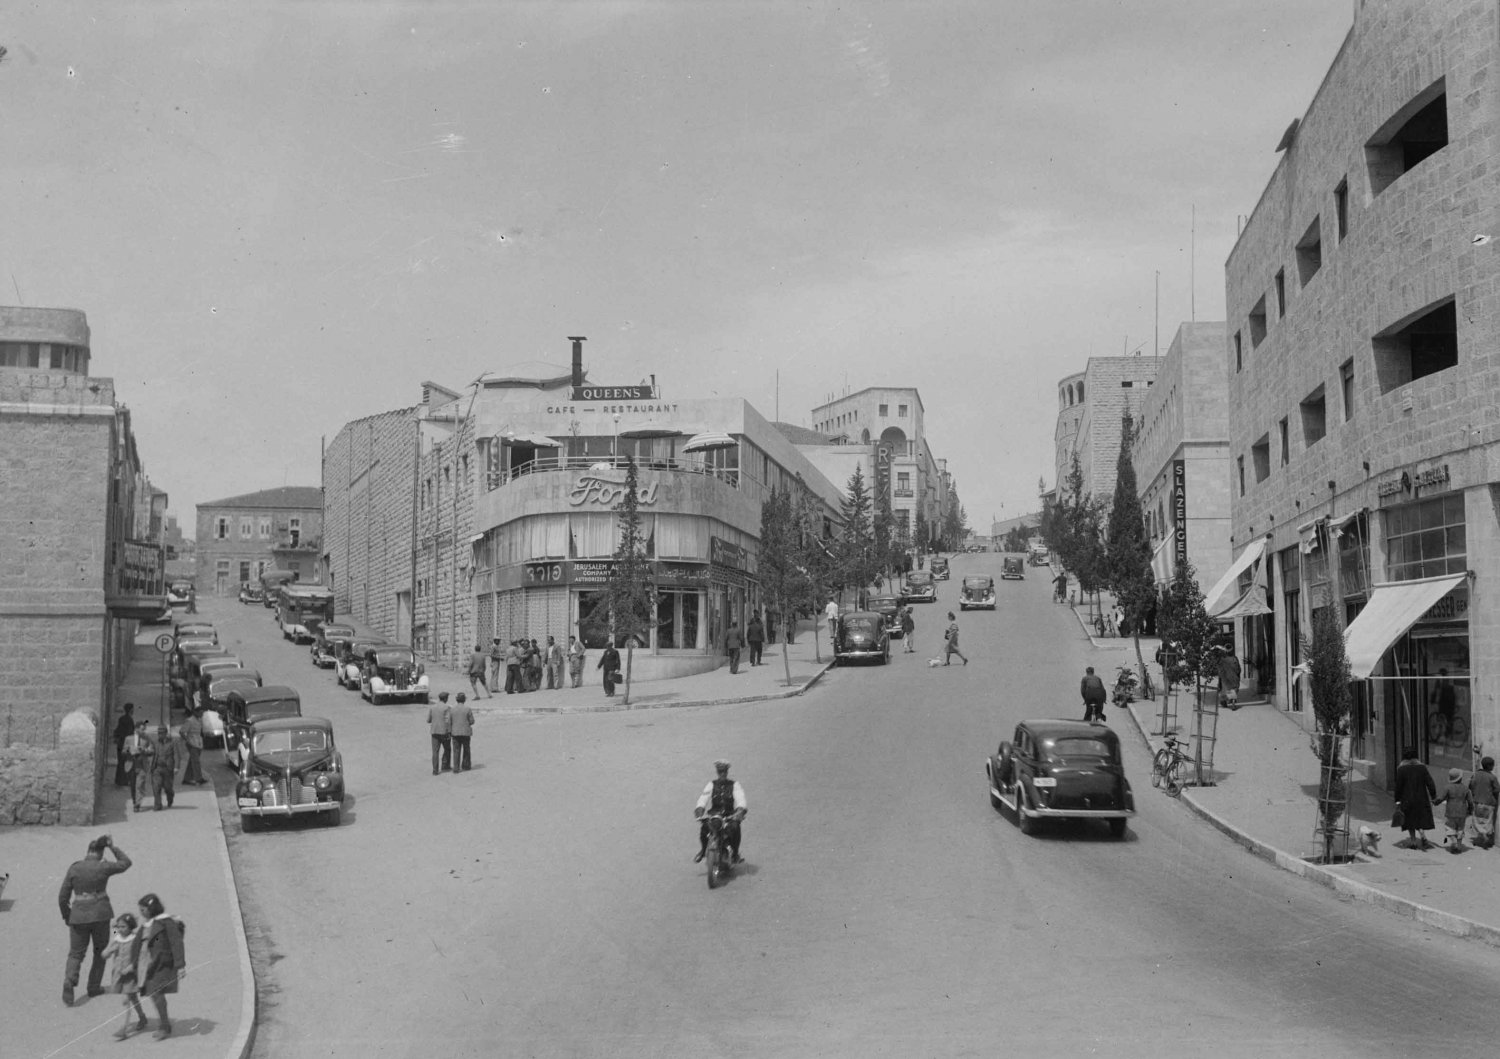 Princess Mary Avenue in the Ba'qa neighborhood in Jerusalem's New City, with Cinema Rex visible in the background